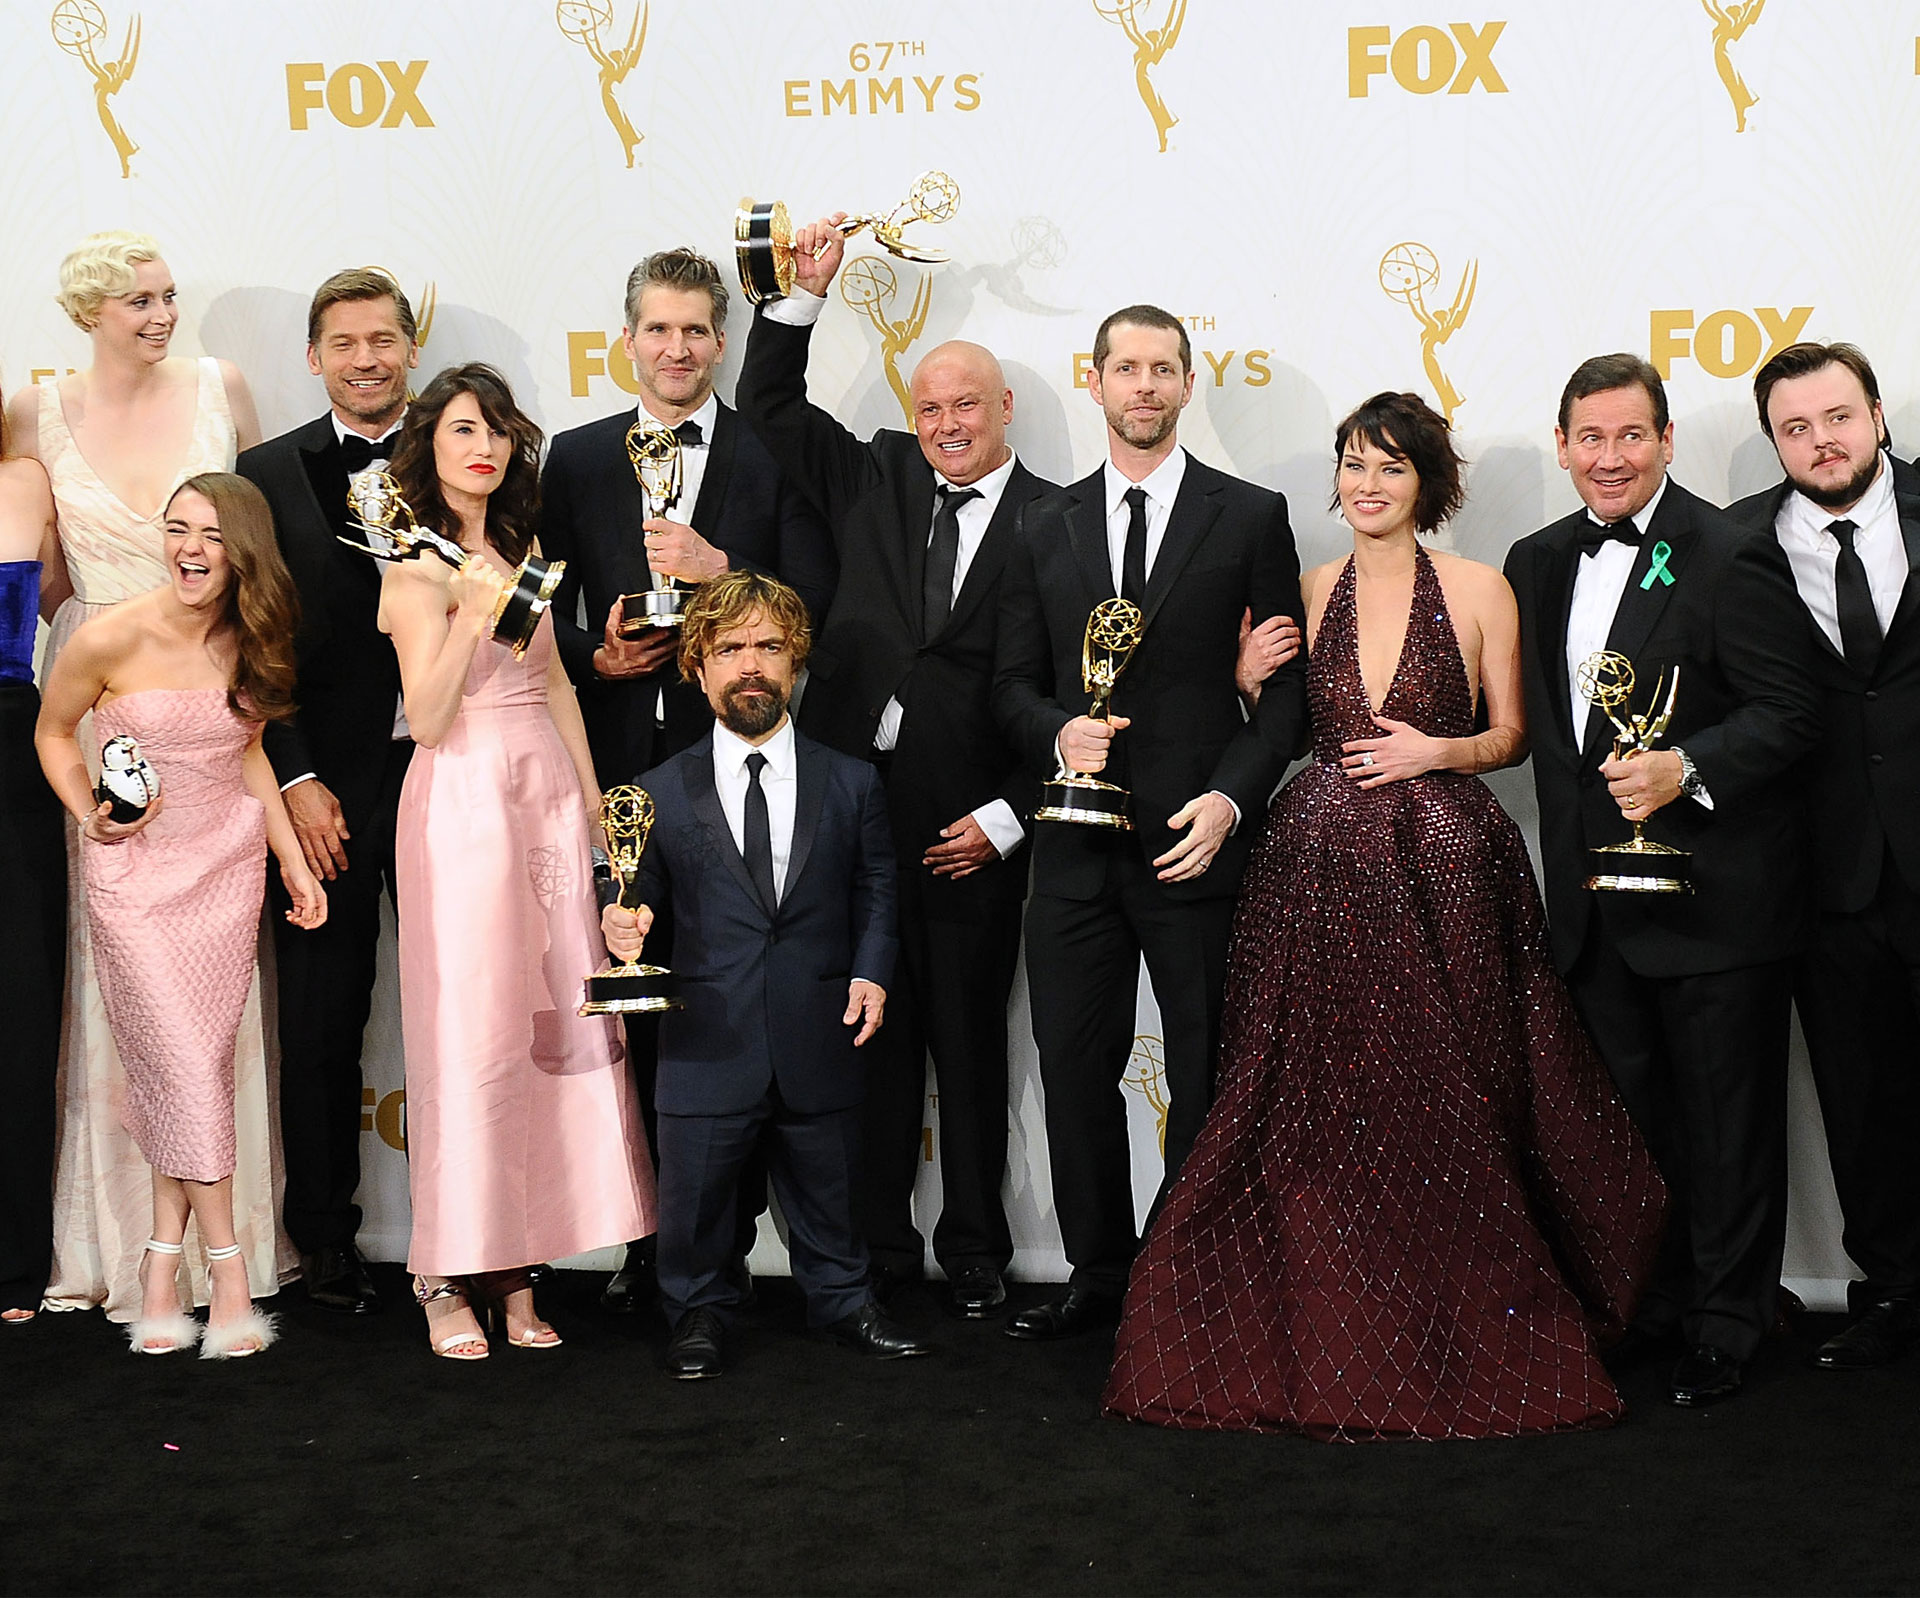 Game of Thrones cast Emmys 2015